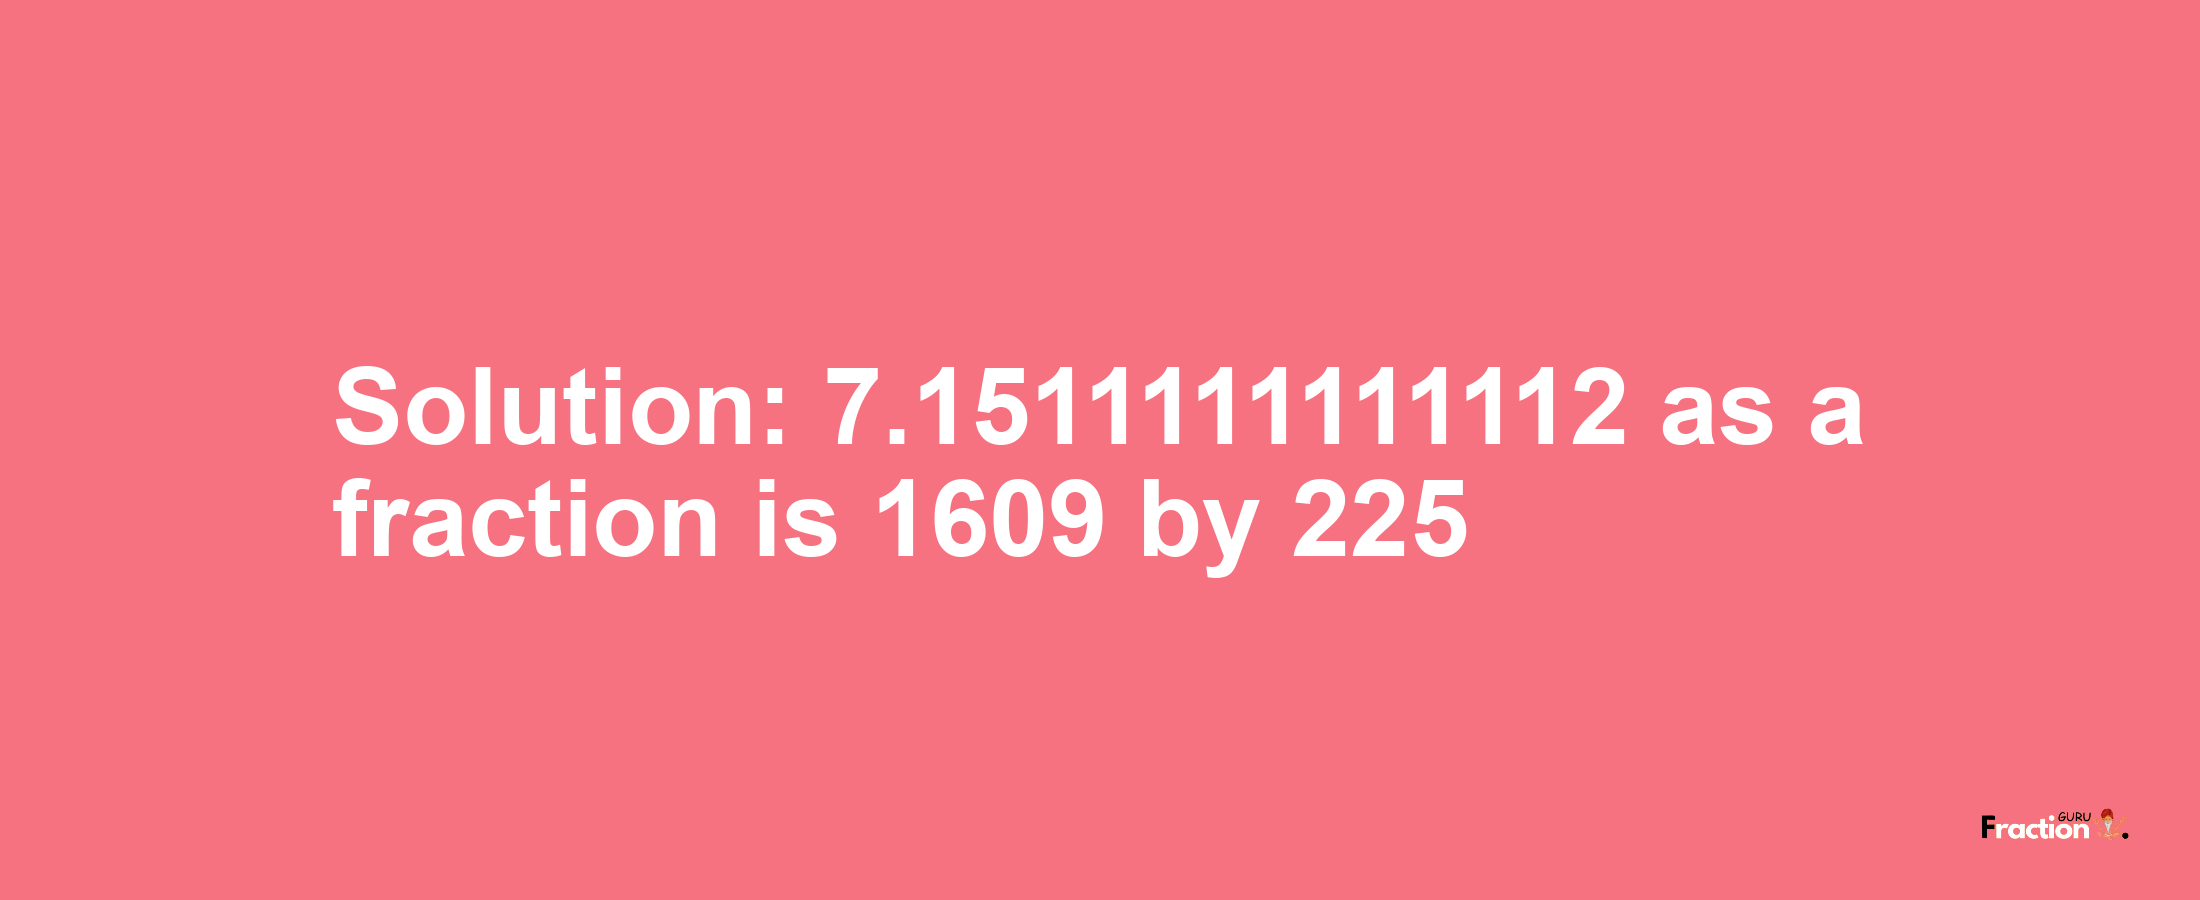 Solution:7.1511111111112 as a fraction is 1609/225